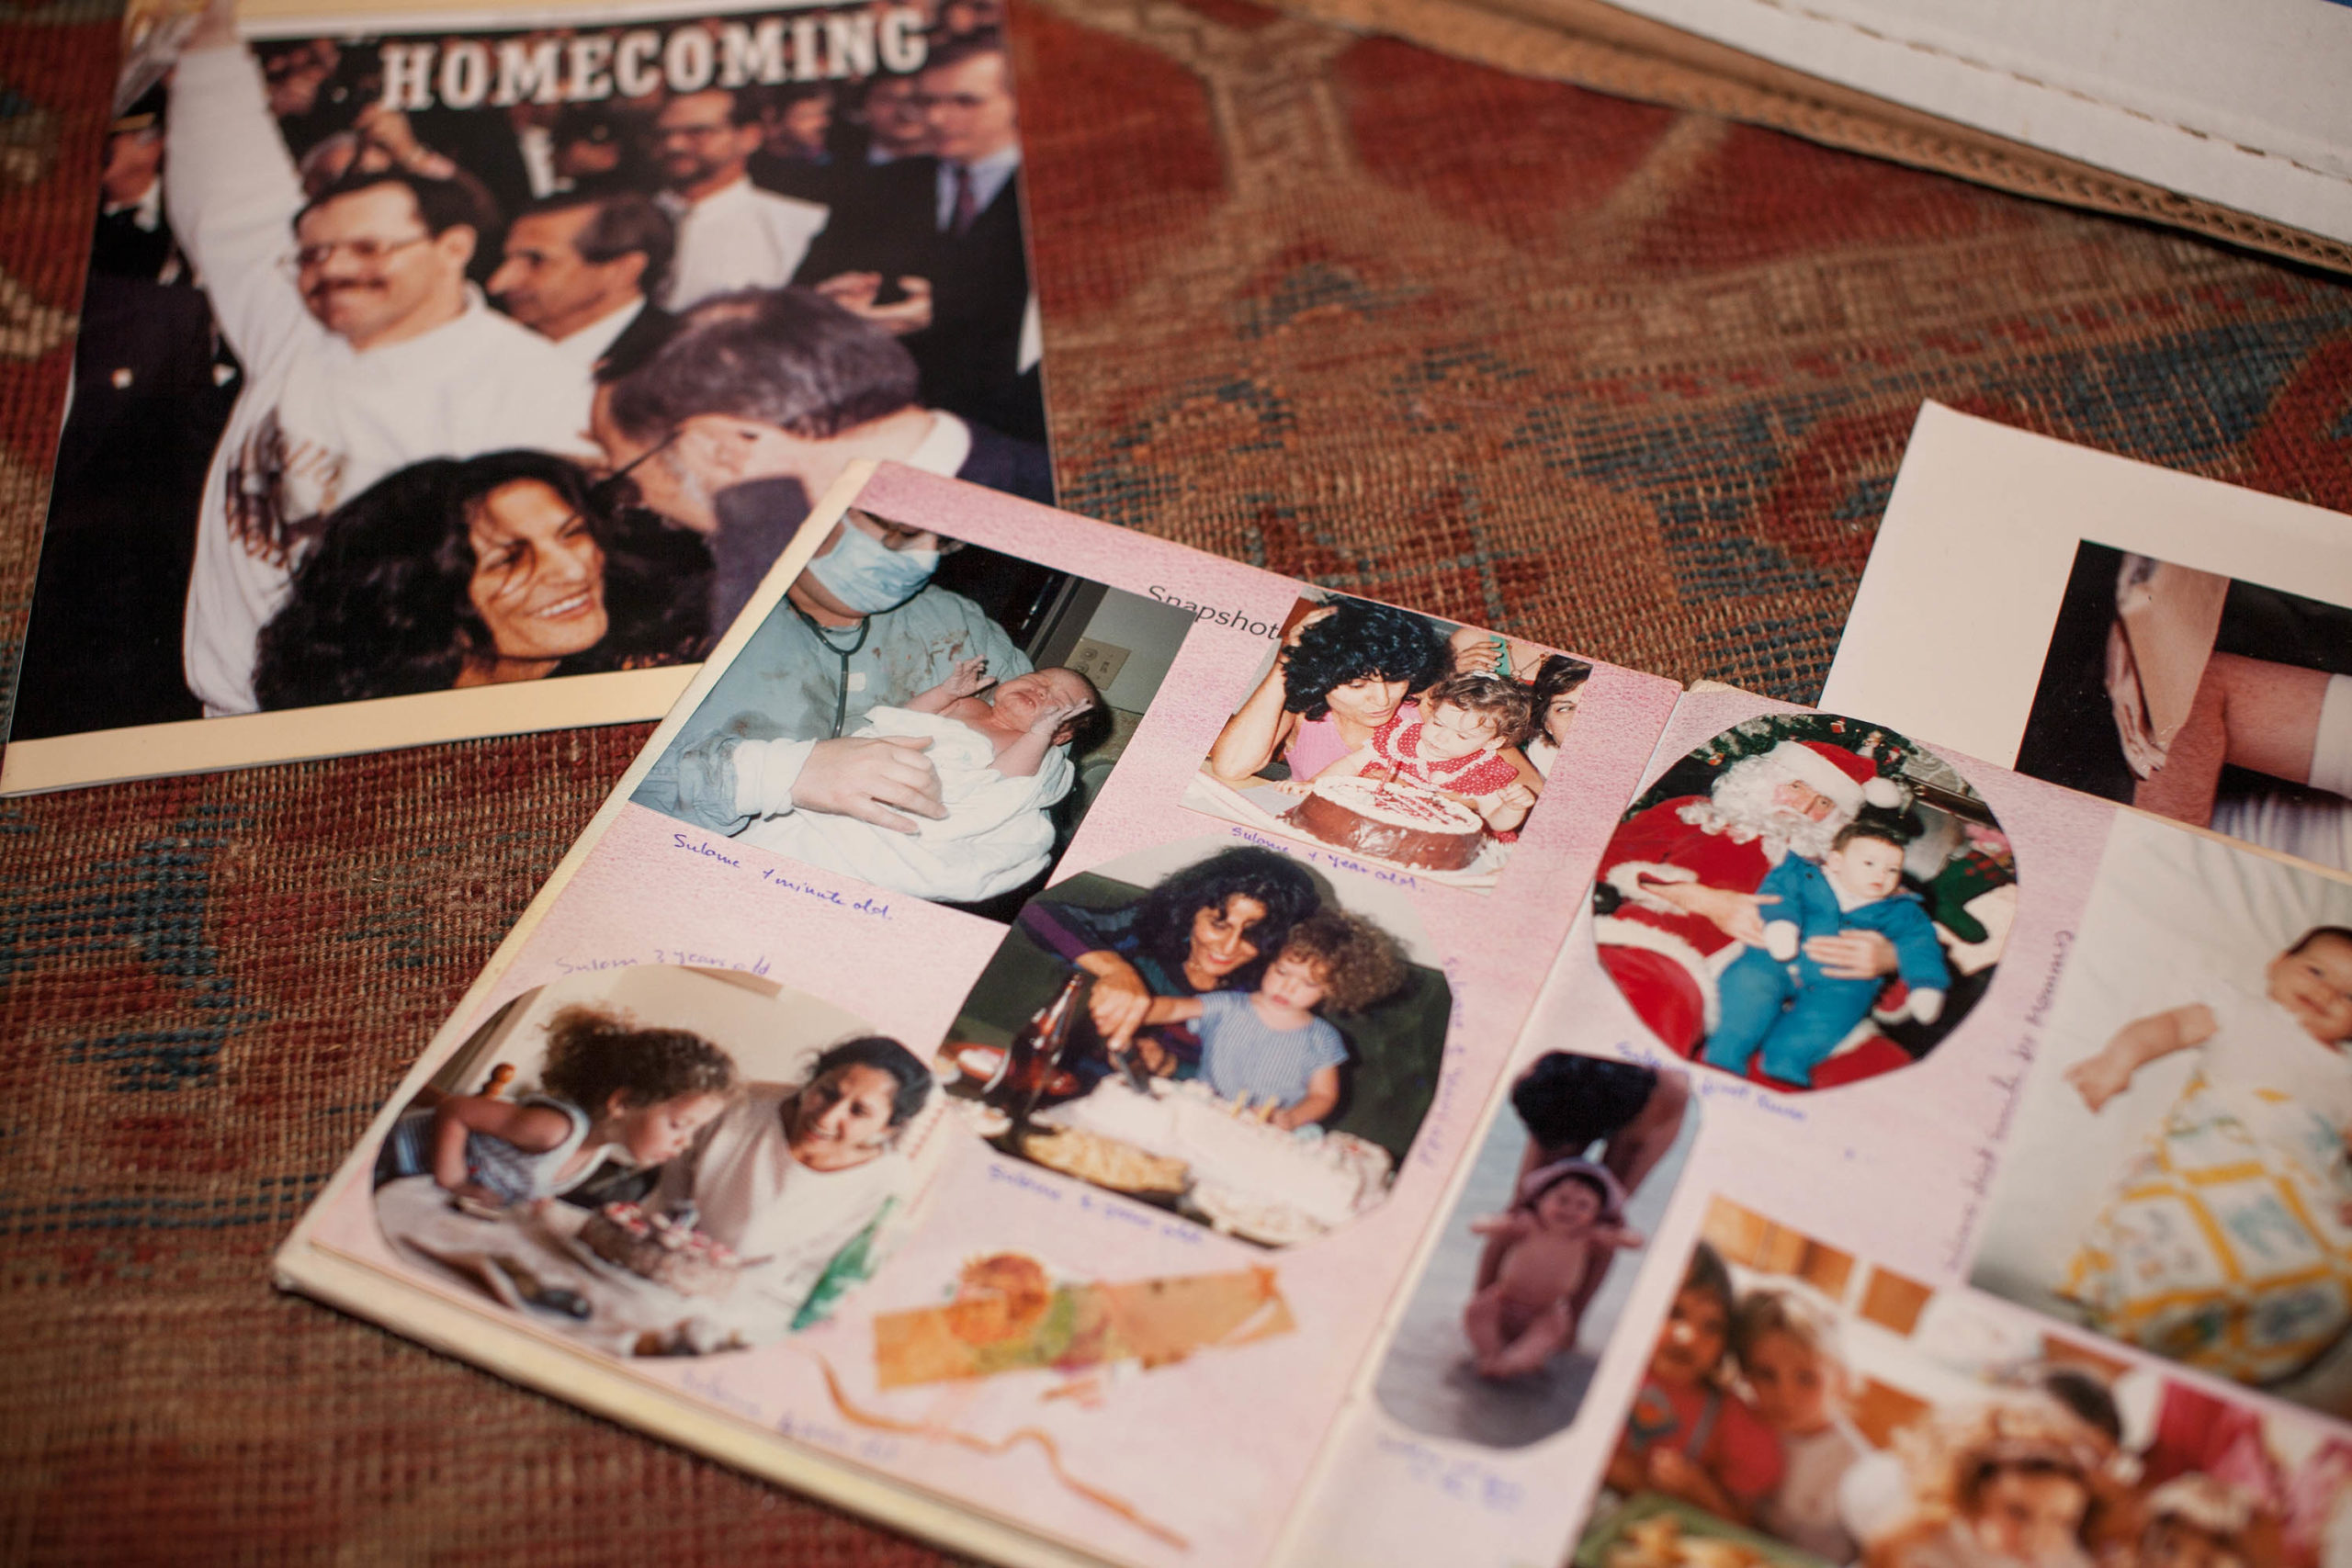 Sulome still maintains a large archive of family photos. Photo by Sara Macel.